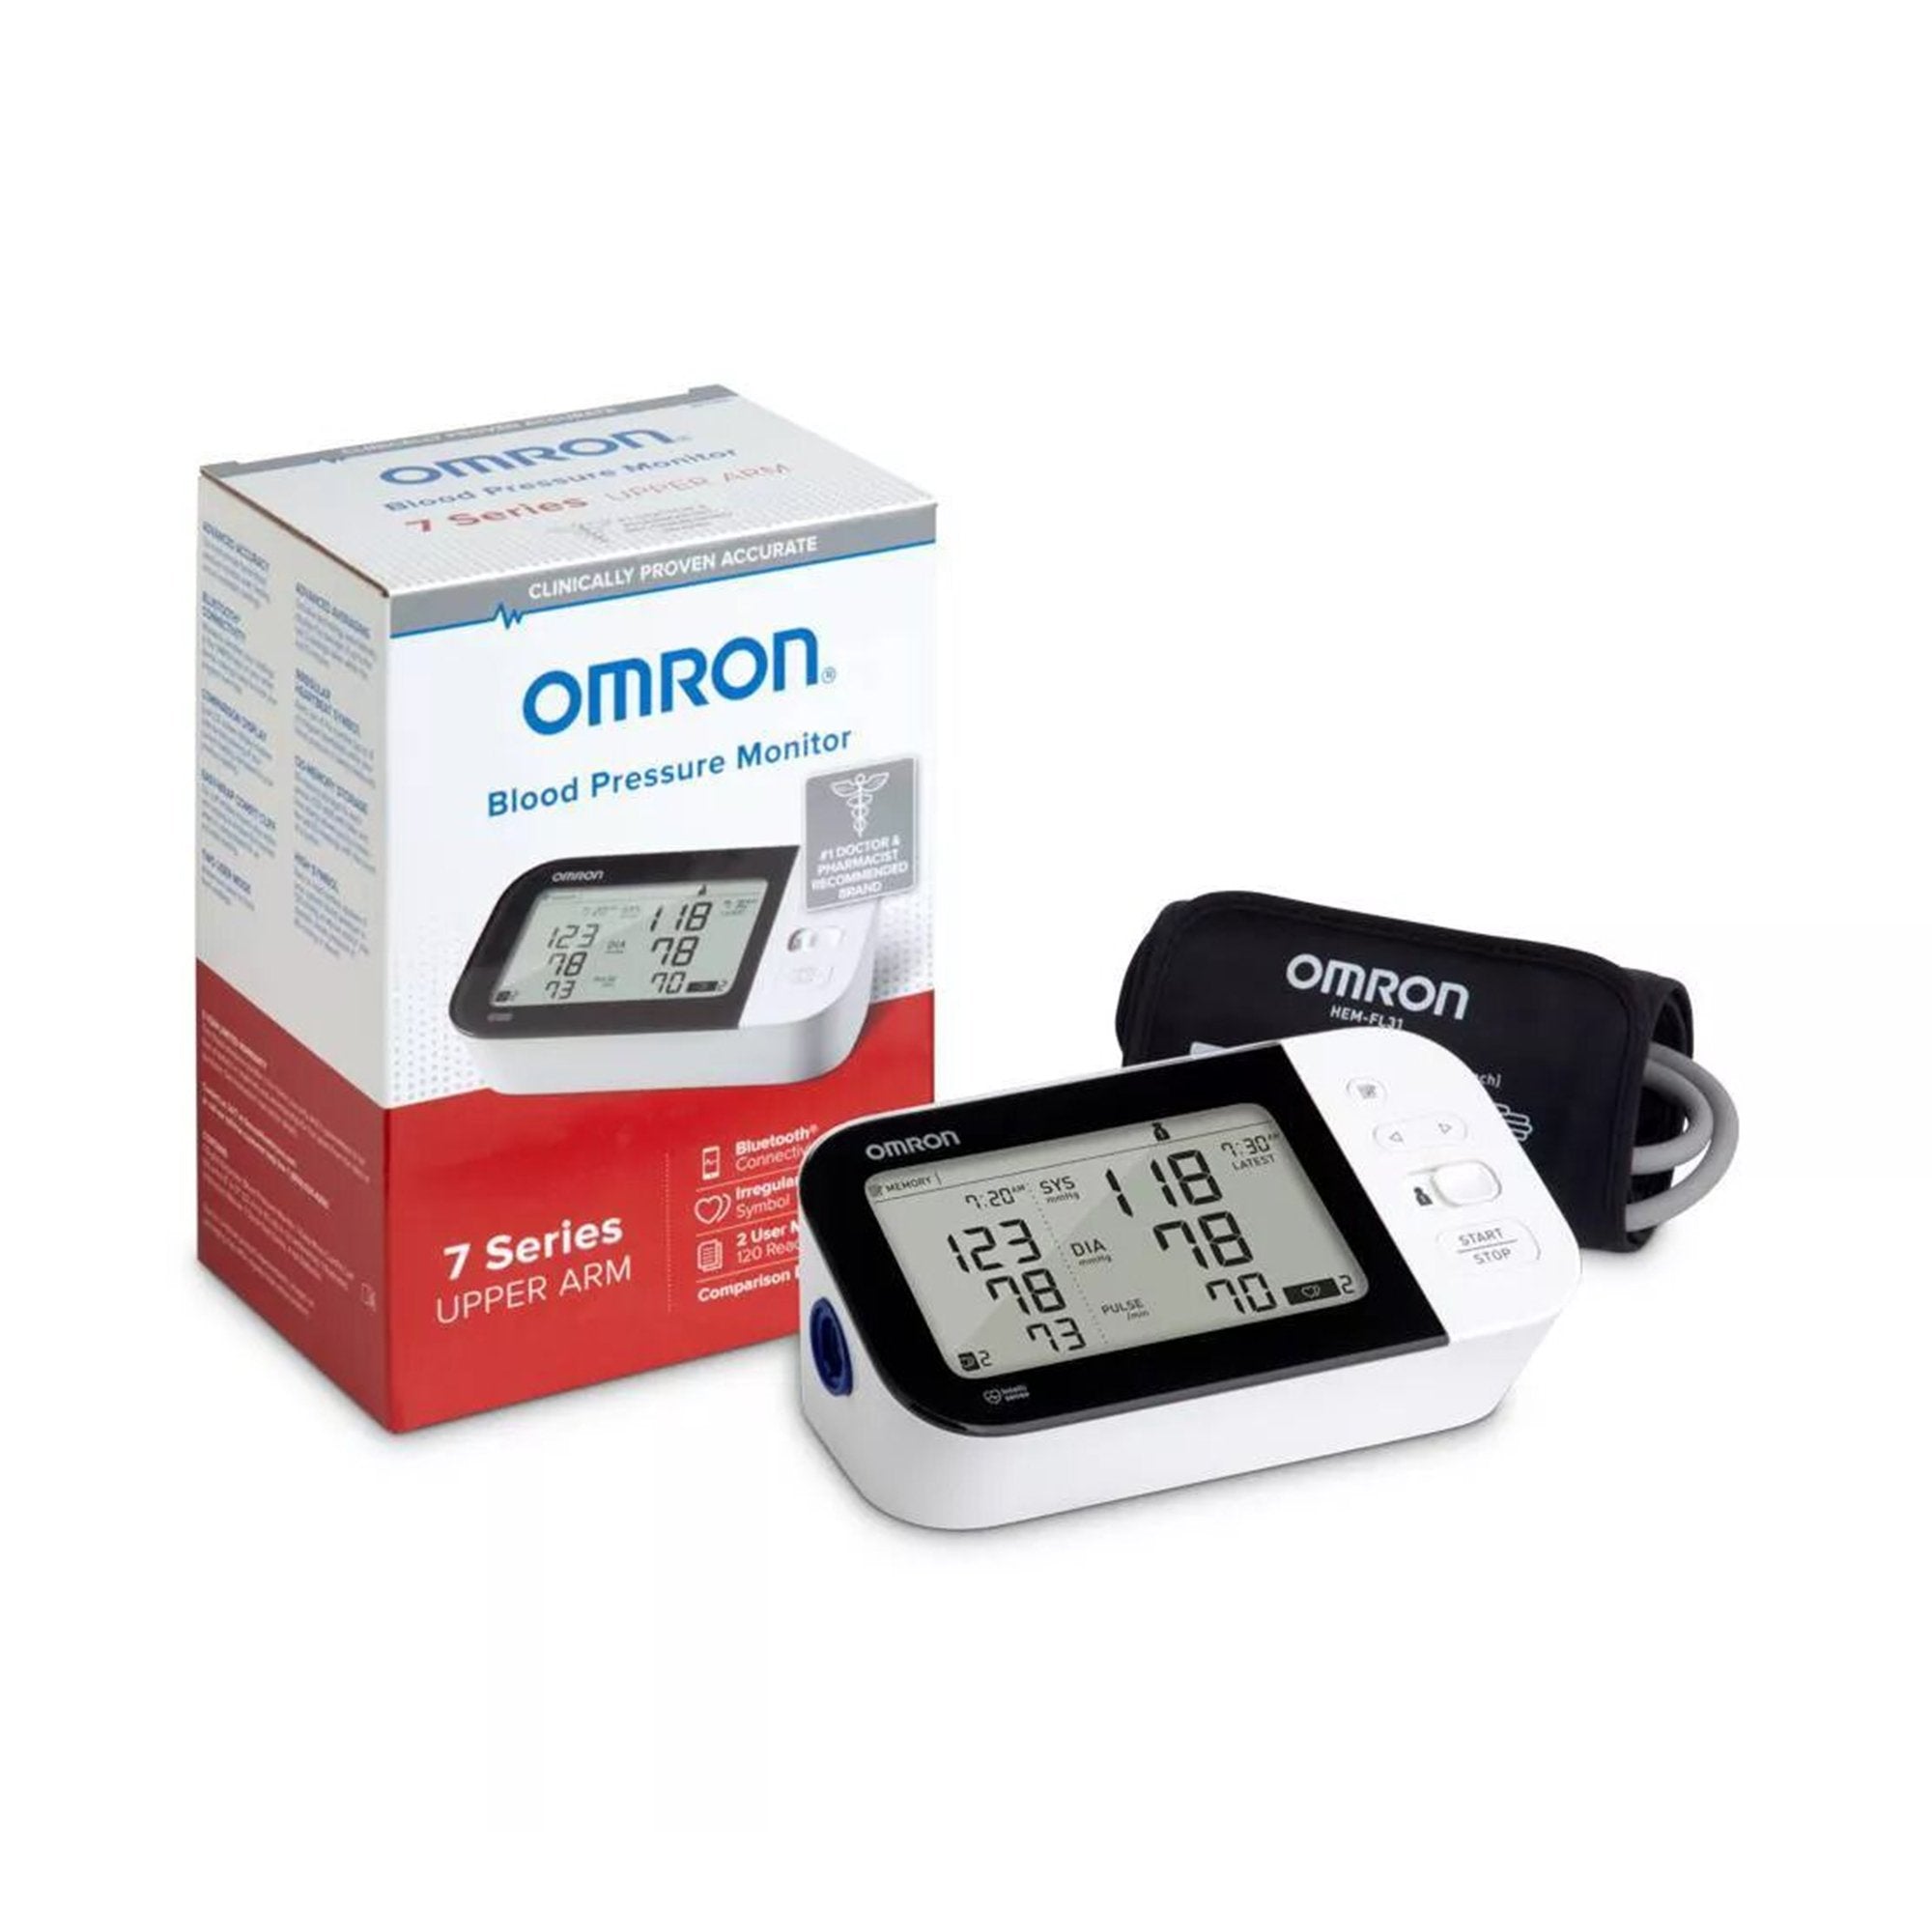 Omron 7 Series Digital Blood Pressure Monitoring Unit for Home Use, Adult Cuff -Each